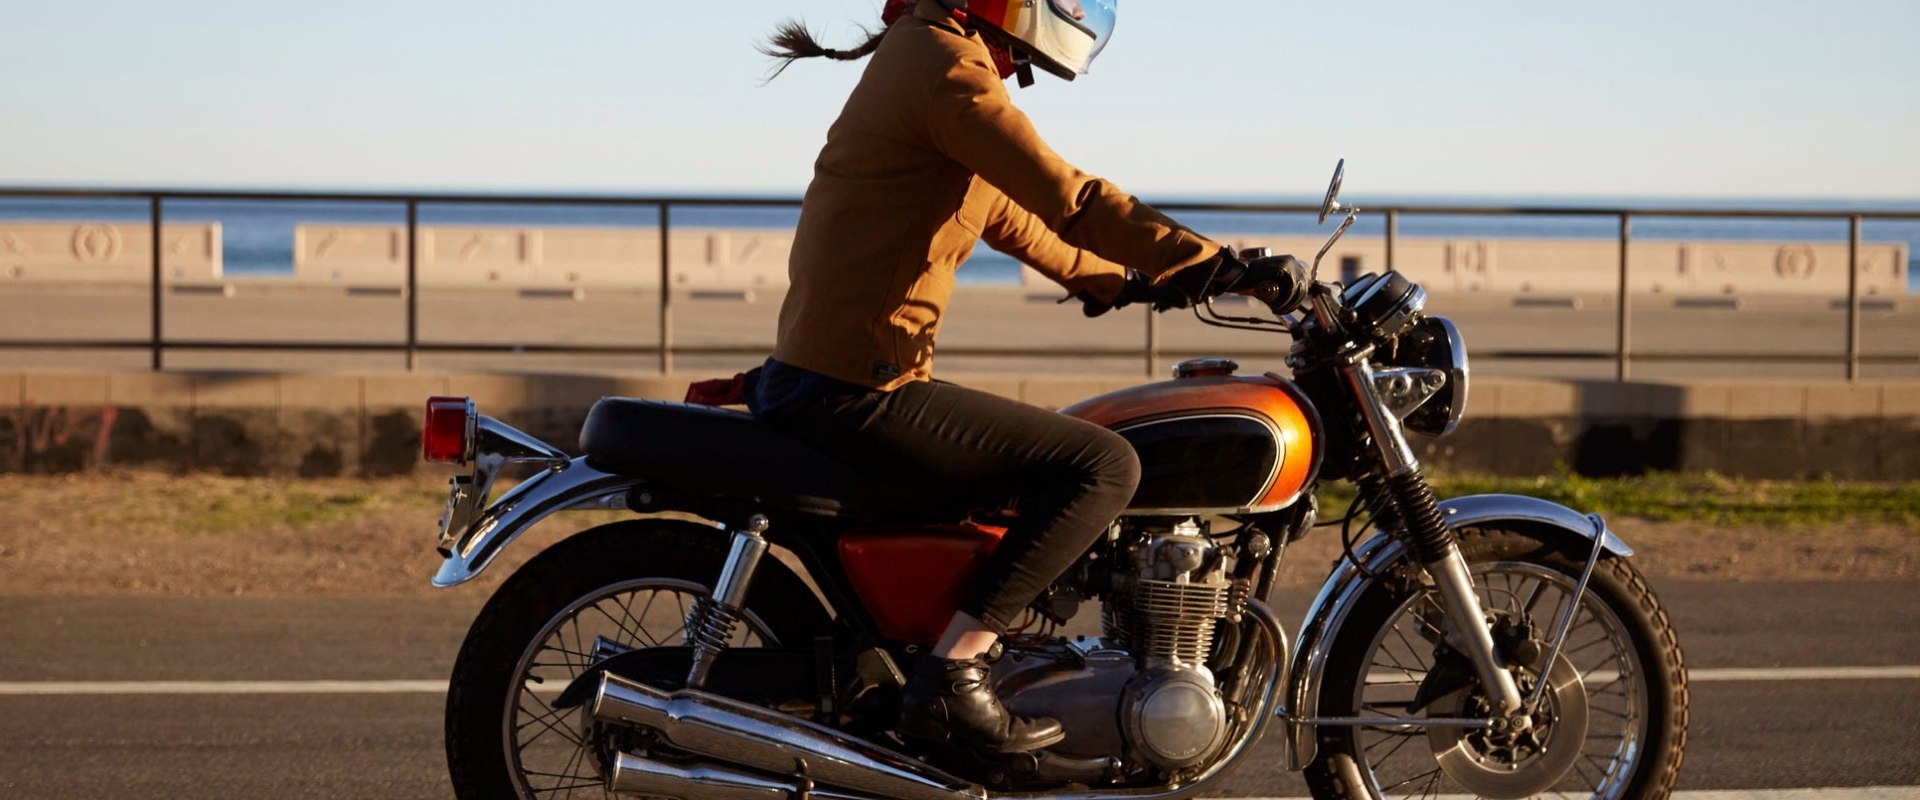 Low-Cost Motorcycle Insurance Premium for a Student